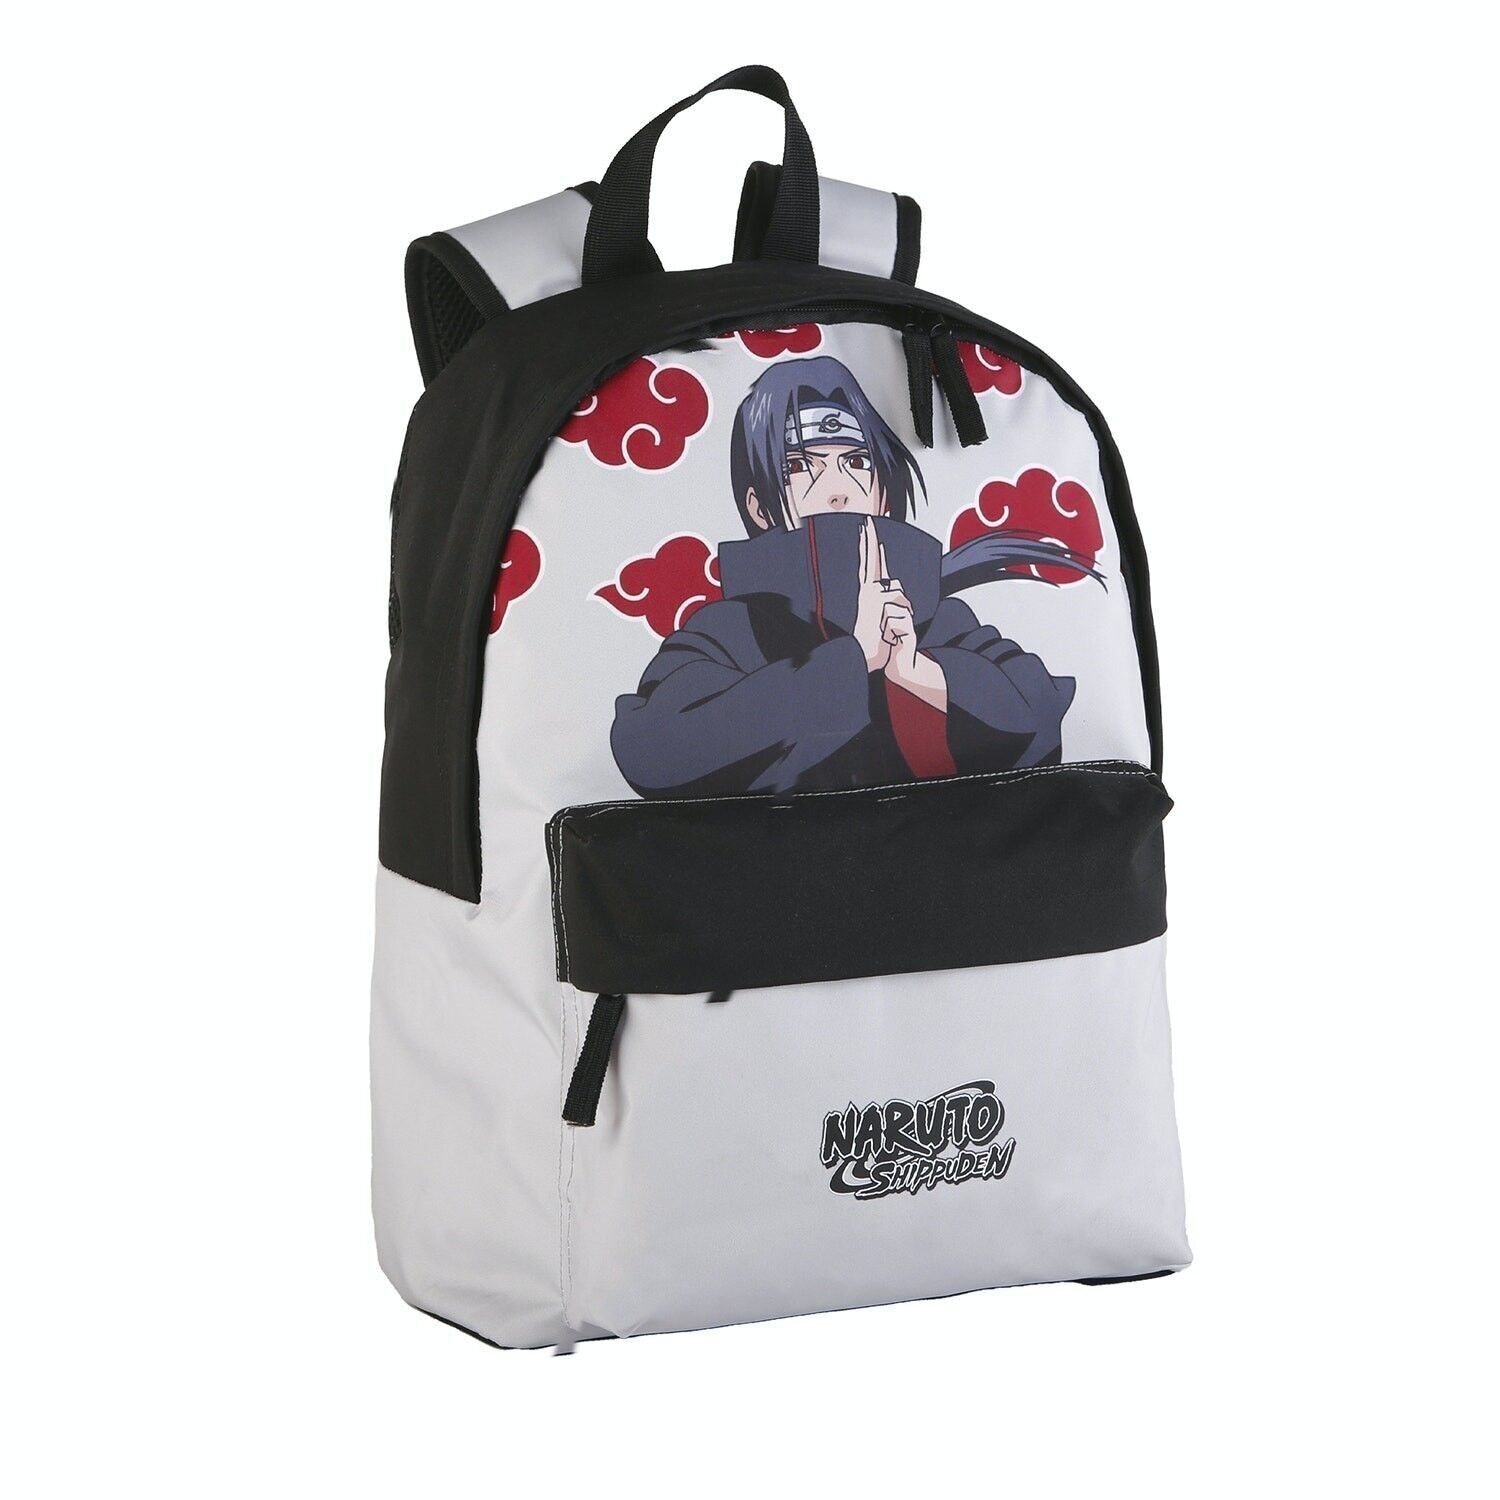 Naruto 13 Inch Sleeve Laptop Backpack, Padded Computer Bag for Commute